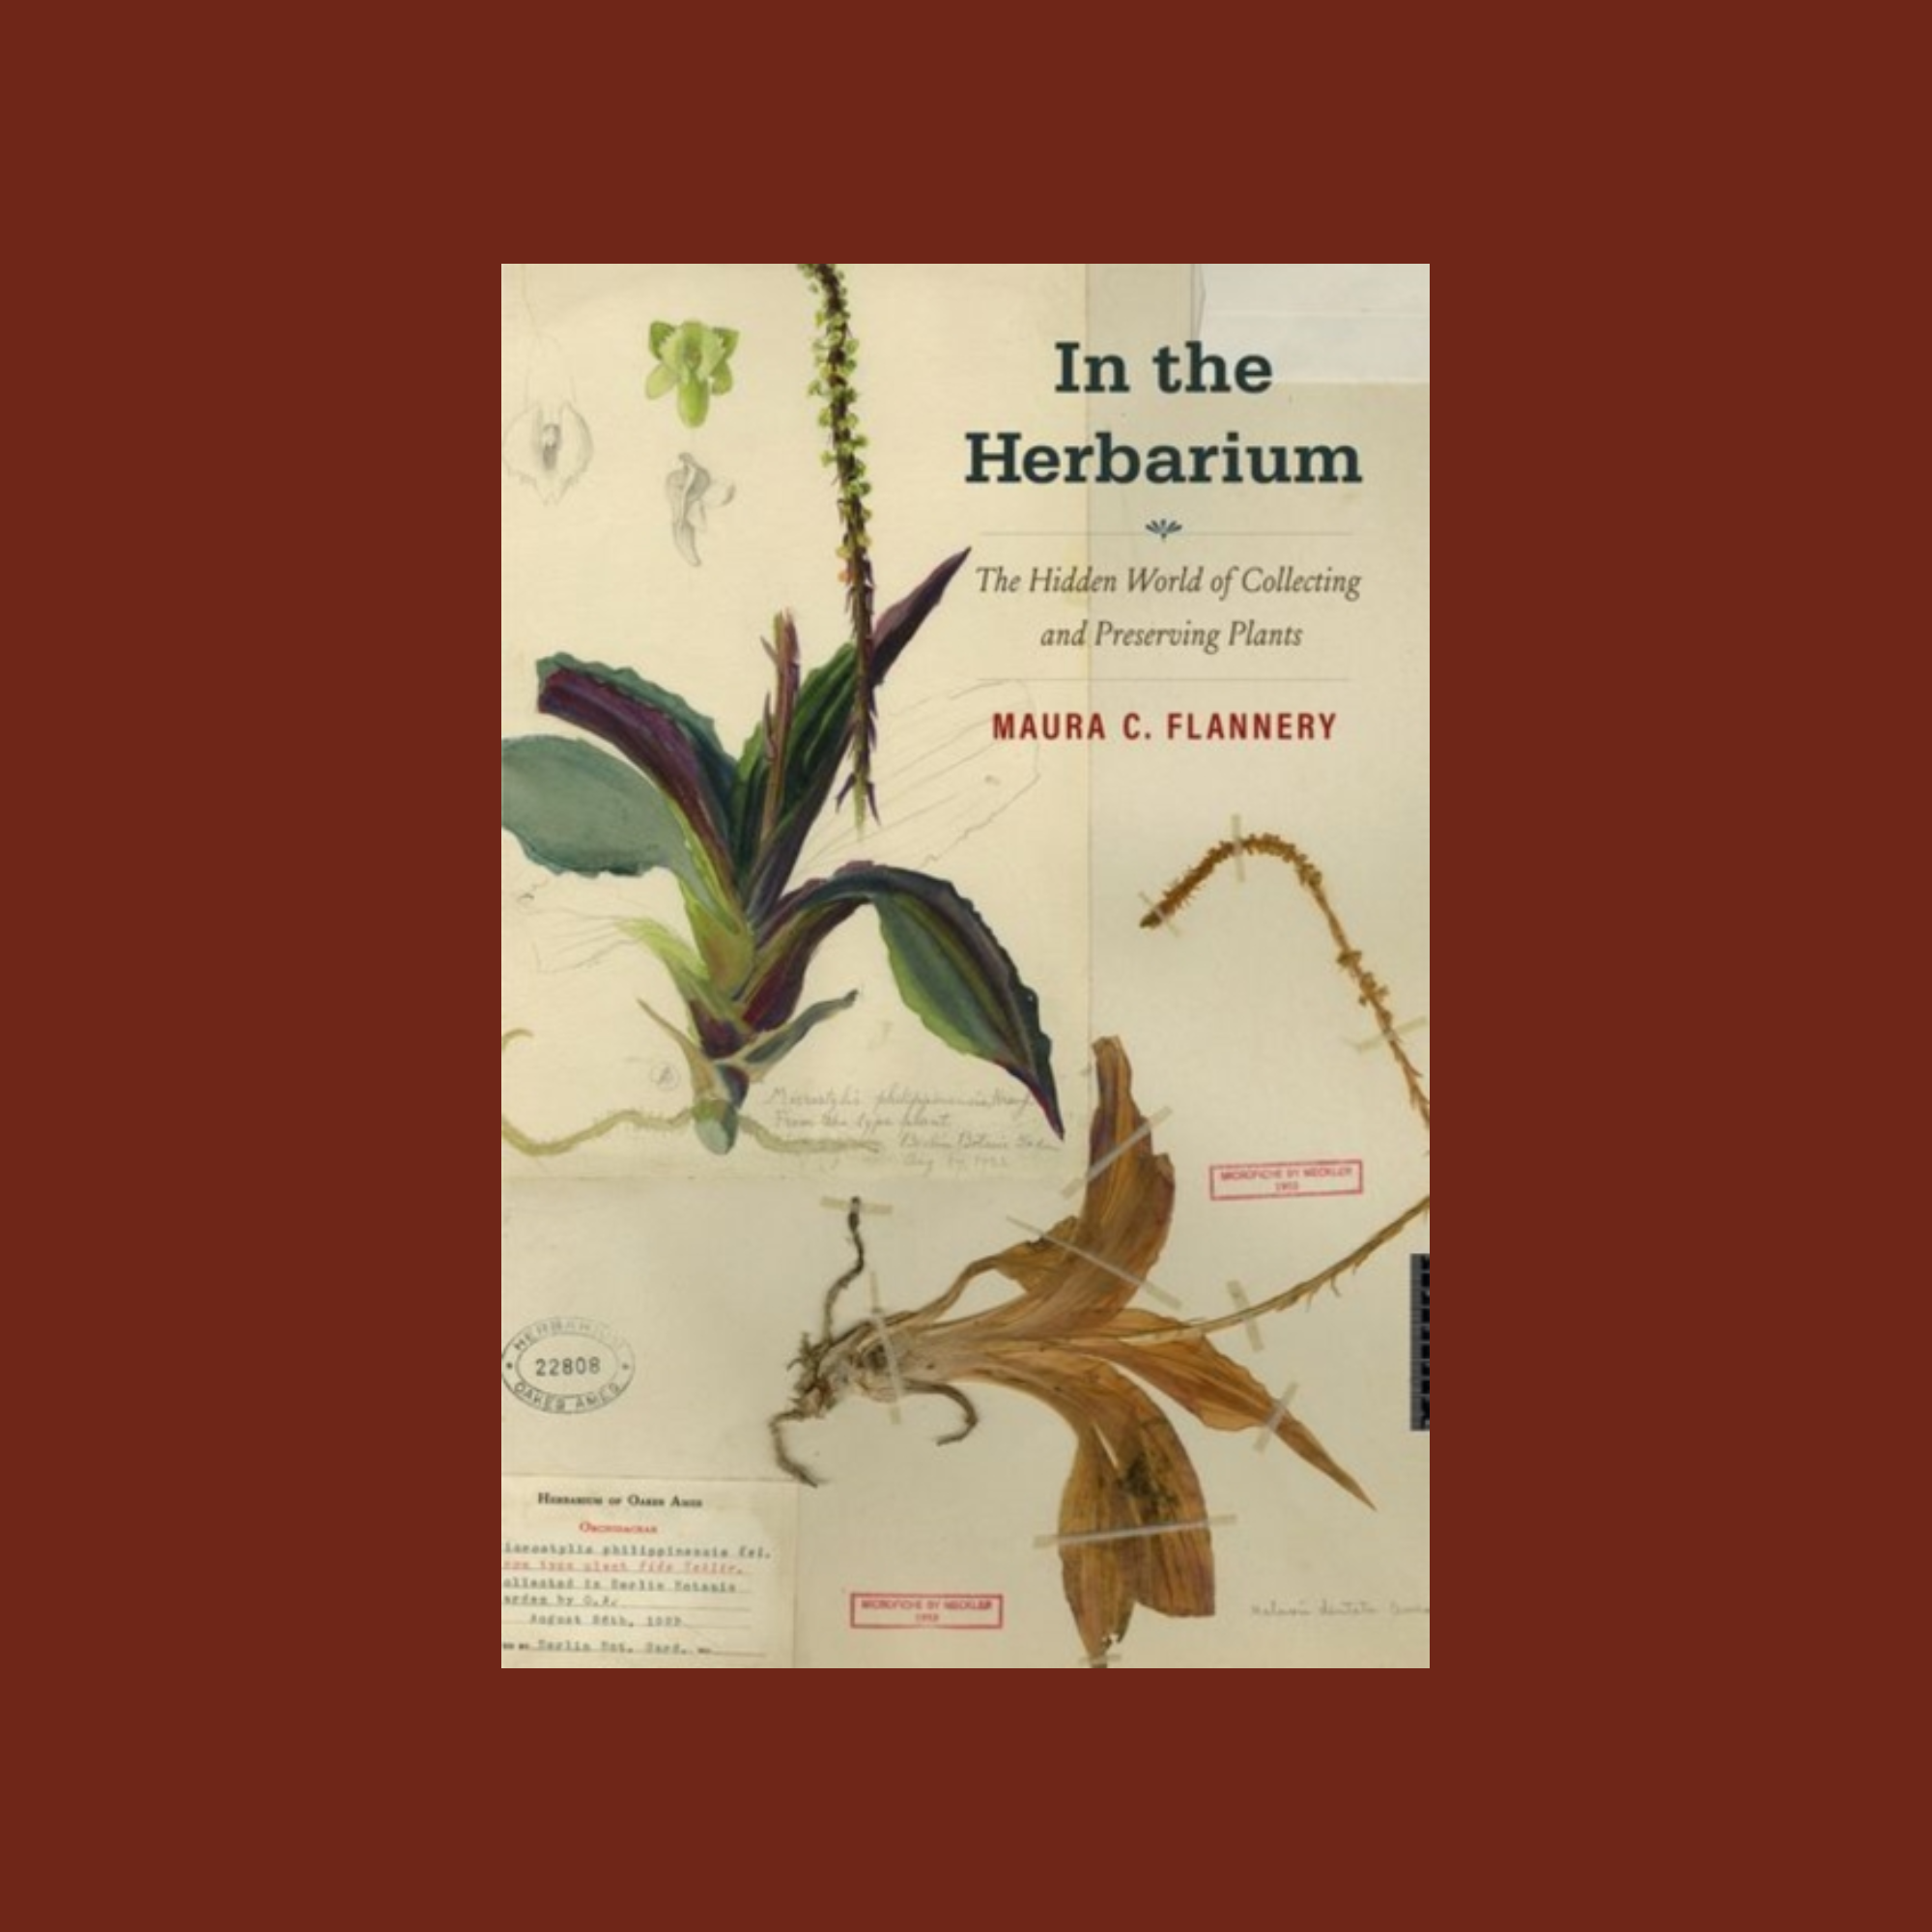 In the Herbarium : The Hidden World of Collecting and Preserving Plants